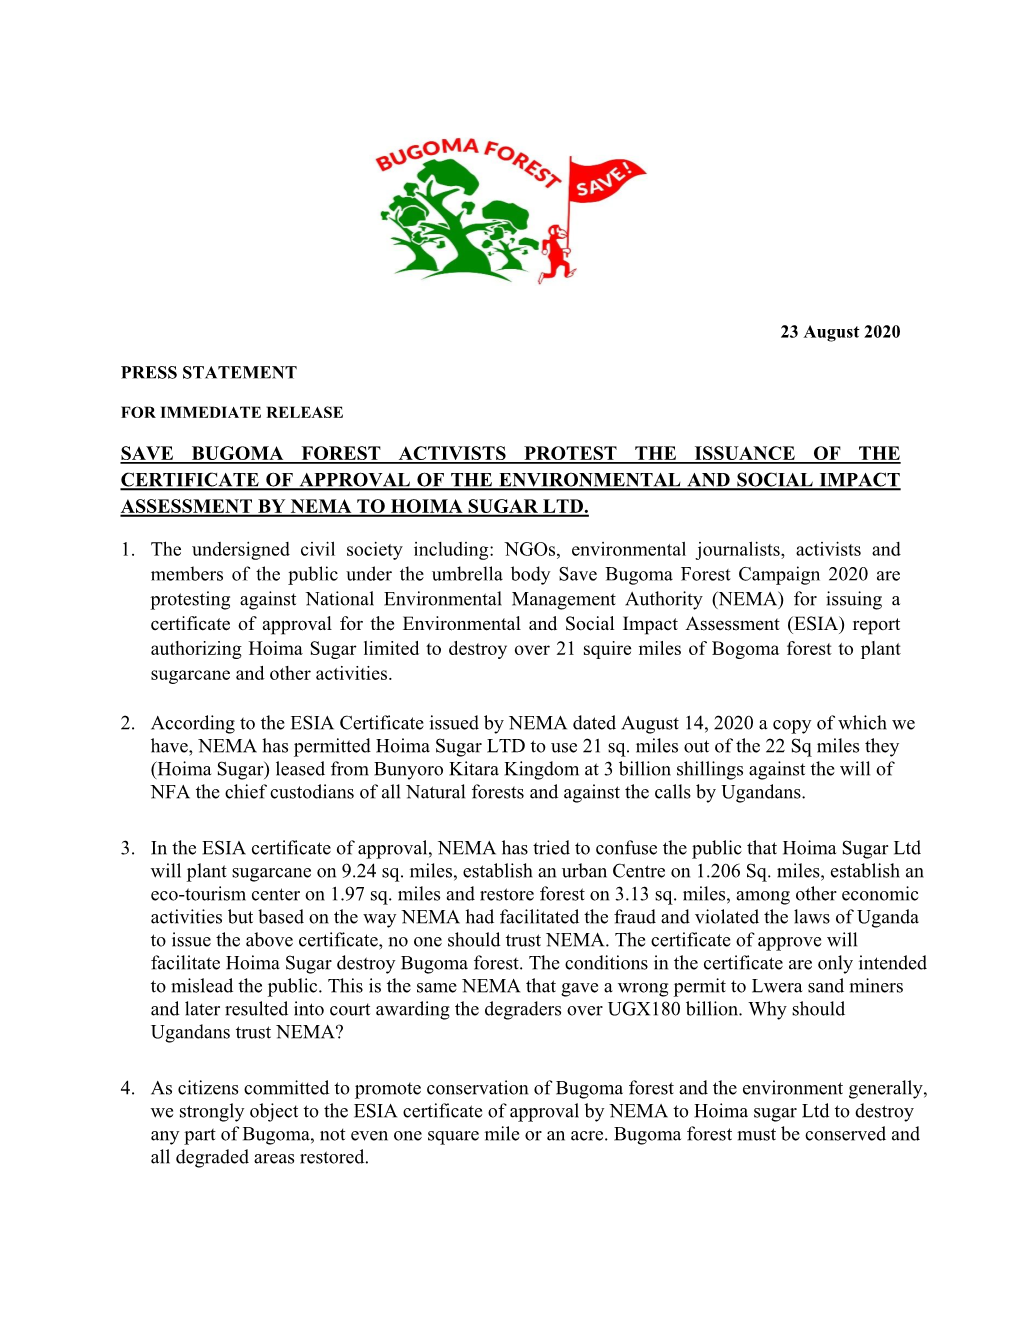 Press Statement: Save Bugoma Forest Activists Protest the Issuance of The